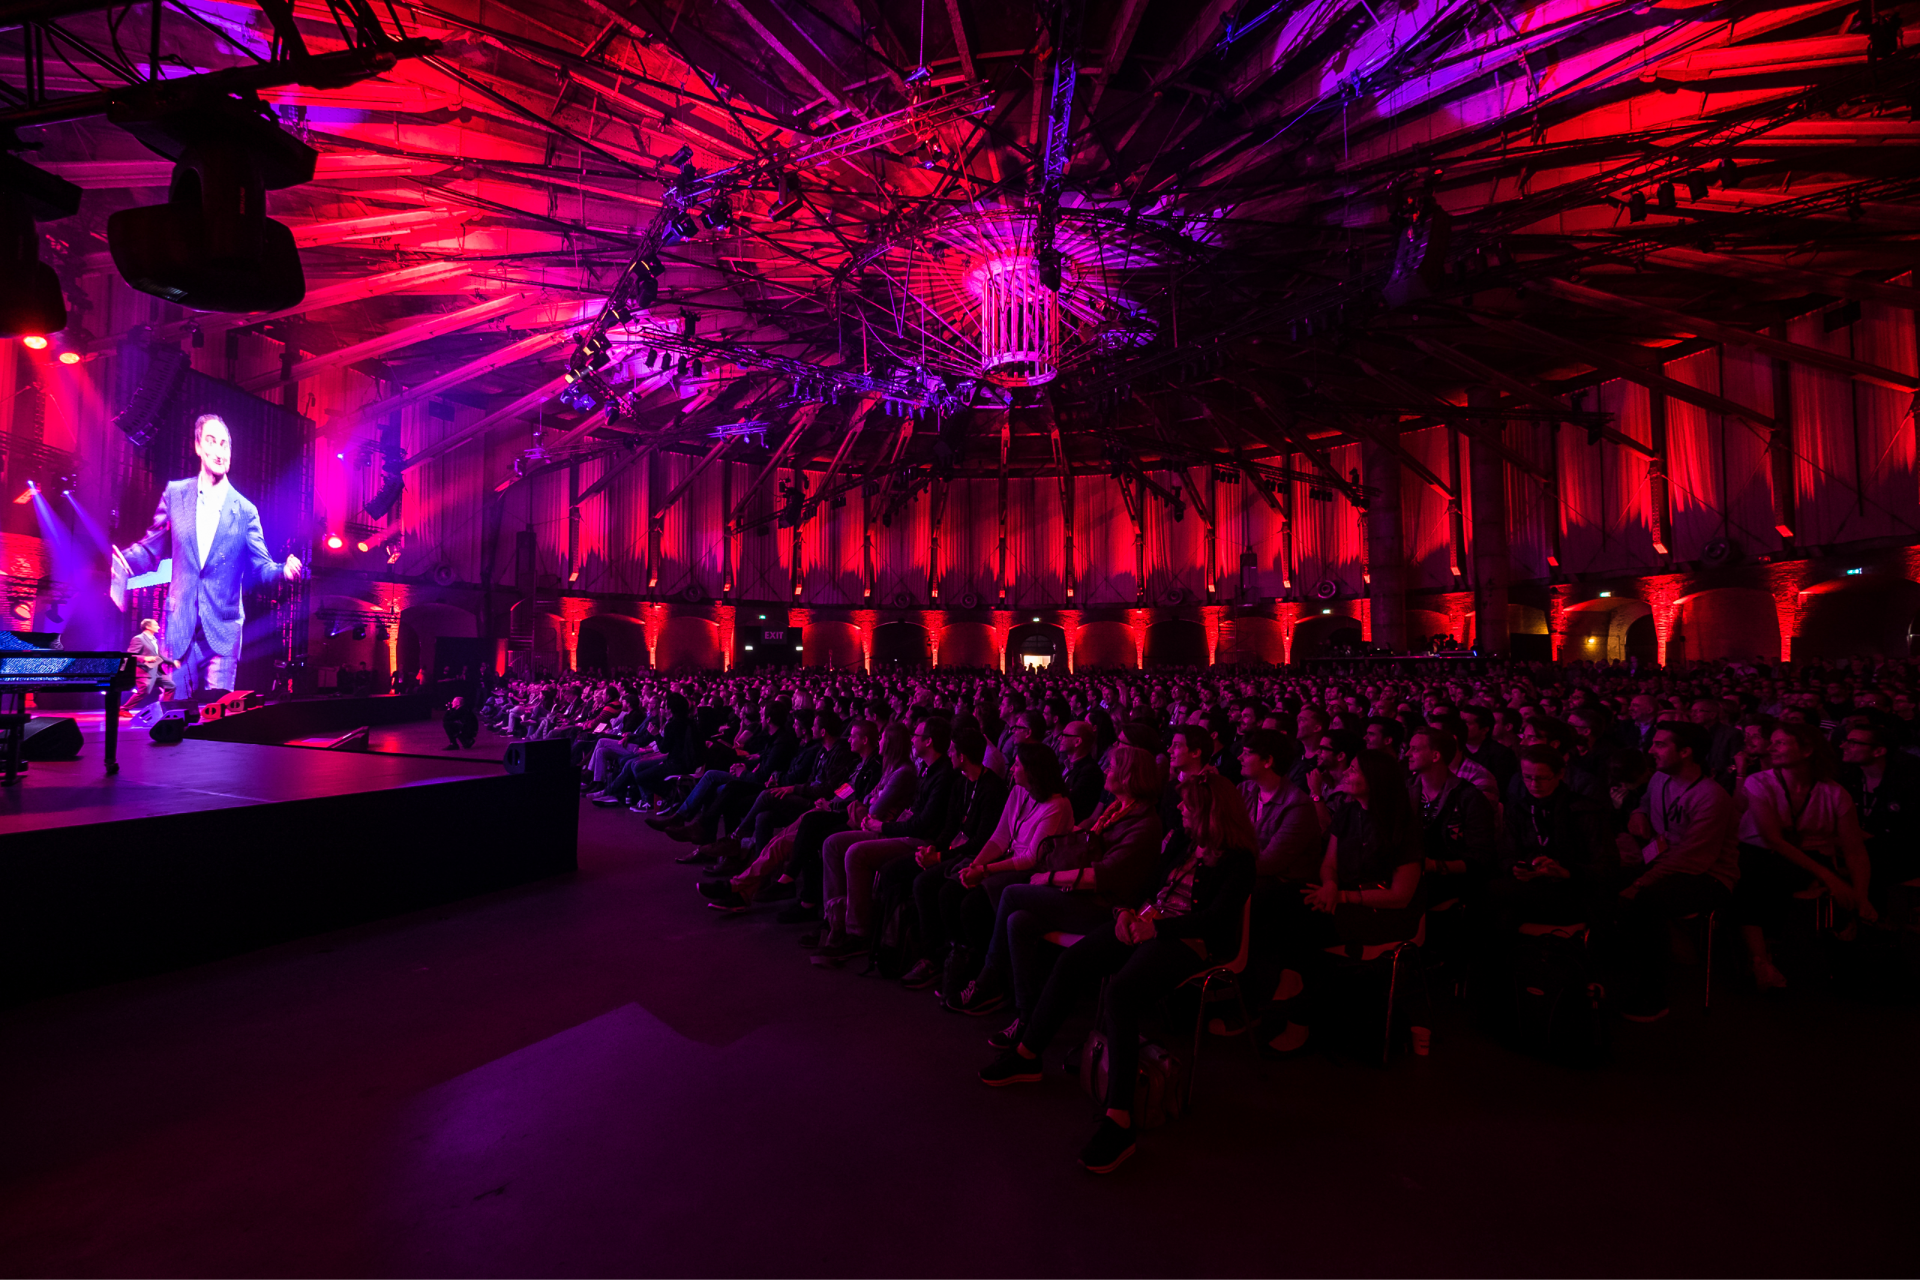 Our delegation to TNW 2023 looks forward to expanding our knowledge about all things tech.